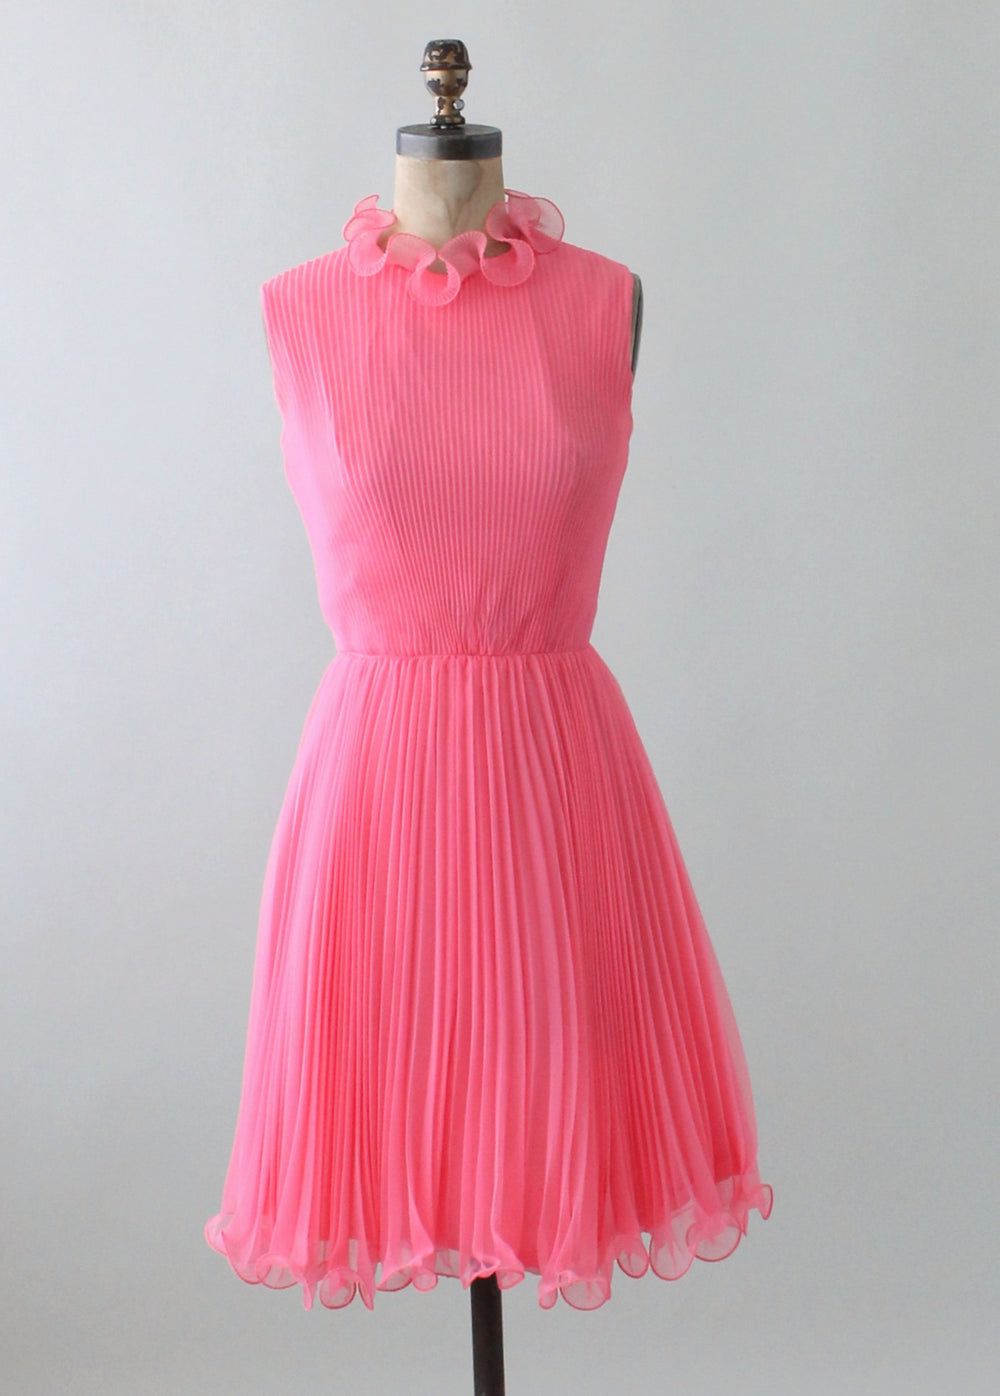 Vintage 1960s Pink Chiffon MOD Party Dress - Raleigh Vintage